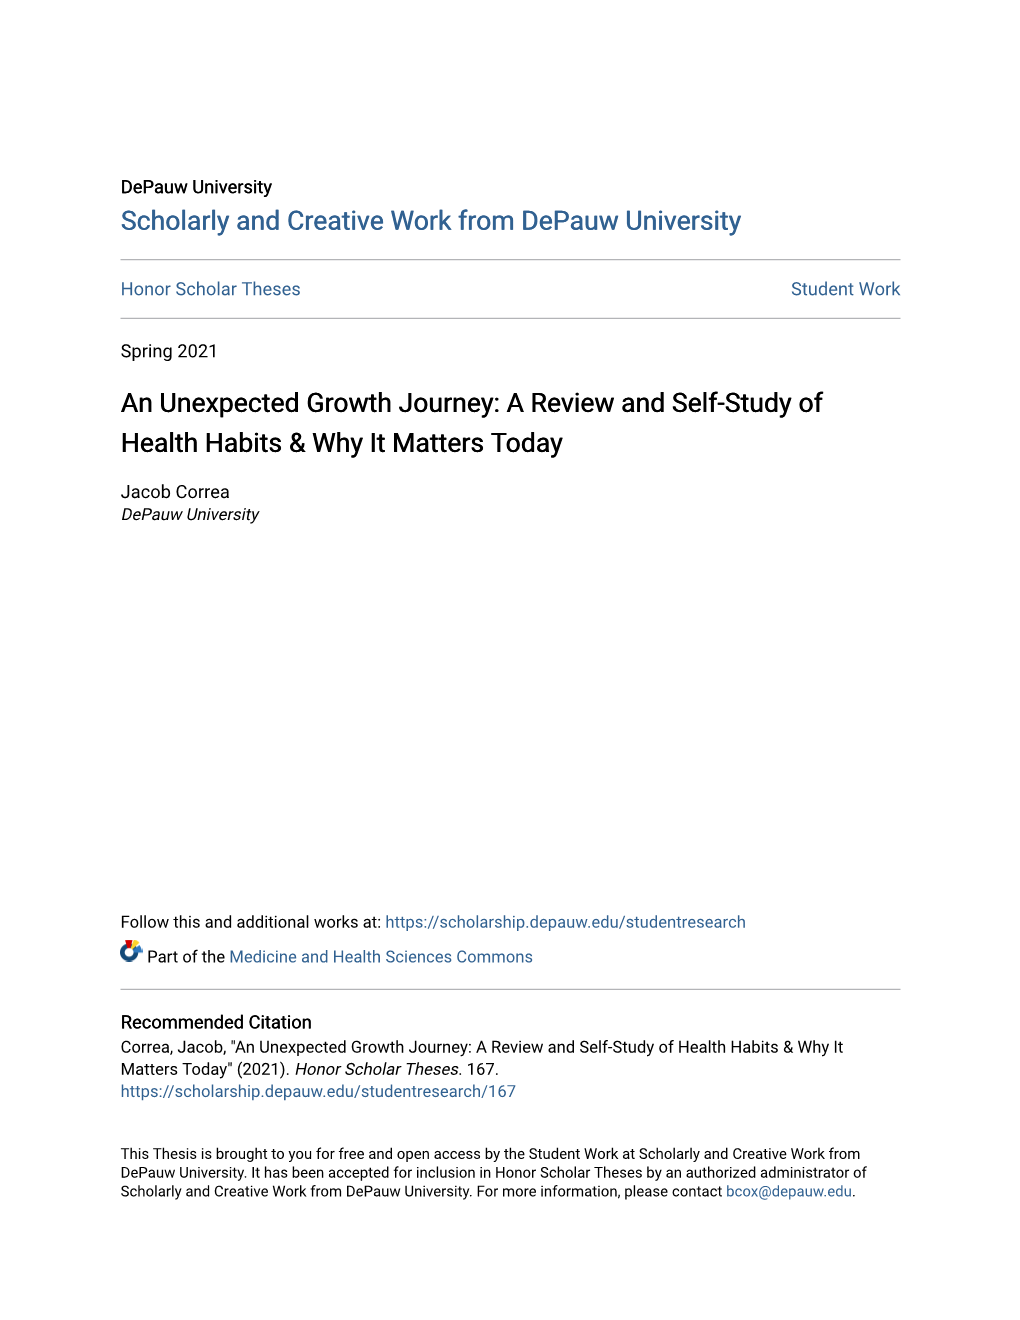 An Unexpected Growth Journey: a Review and Self-Study of Health Habits & Why It Matters Today